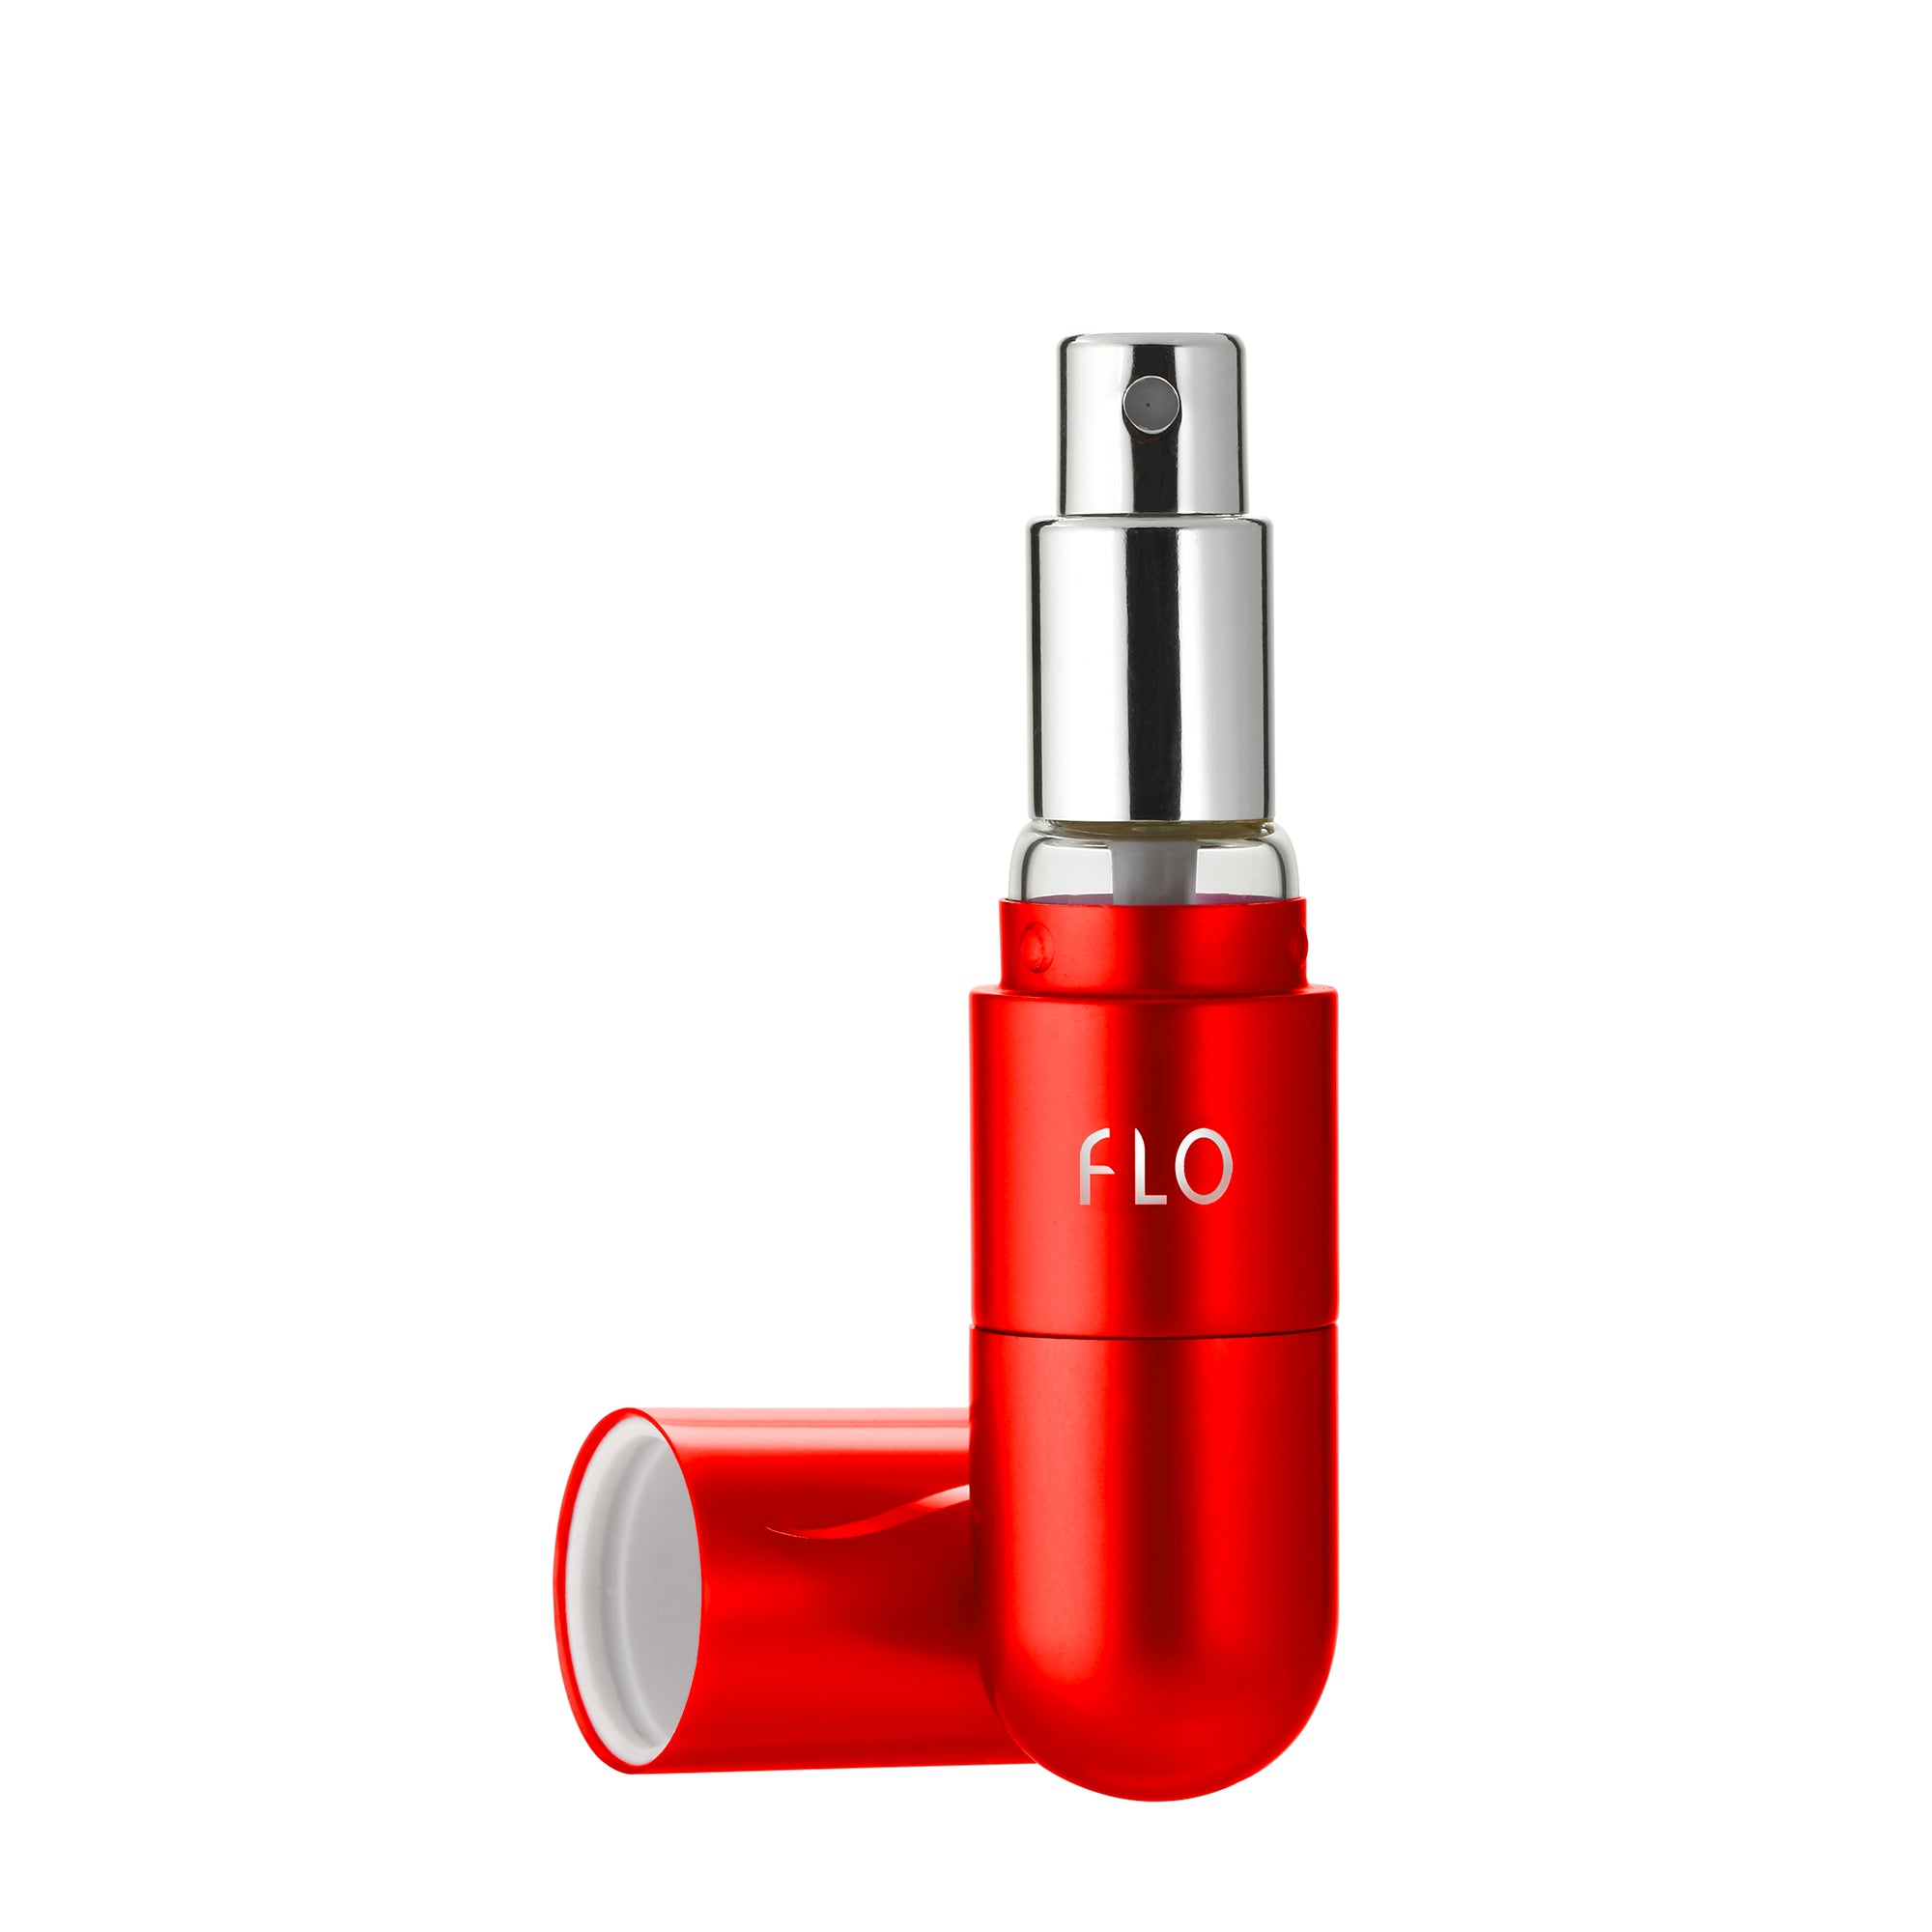 – Perfumania by Flo Atomizer Fill and Fragrance Pump